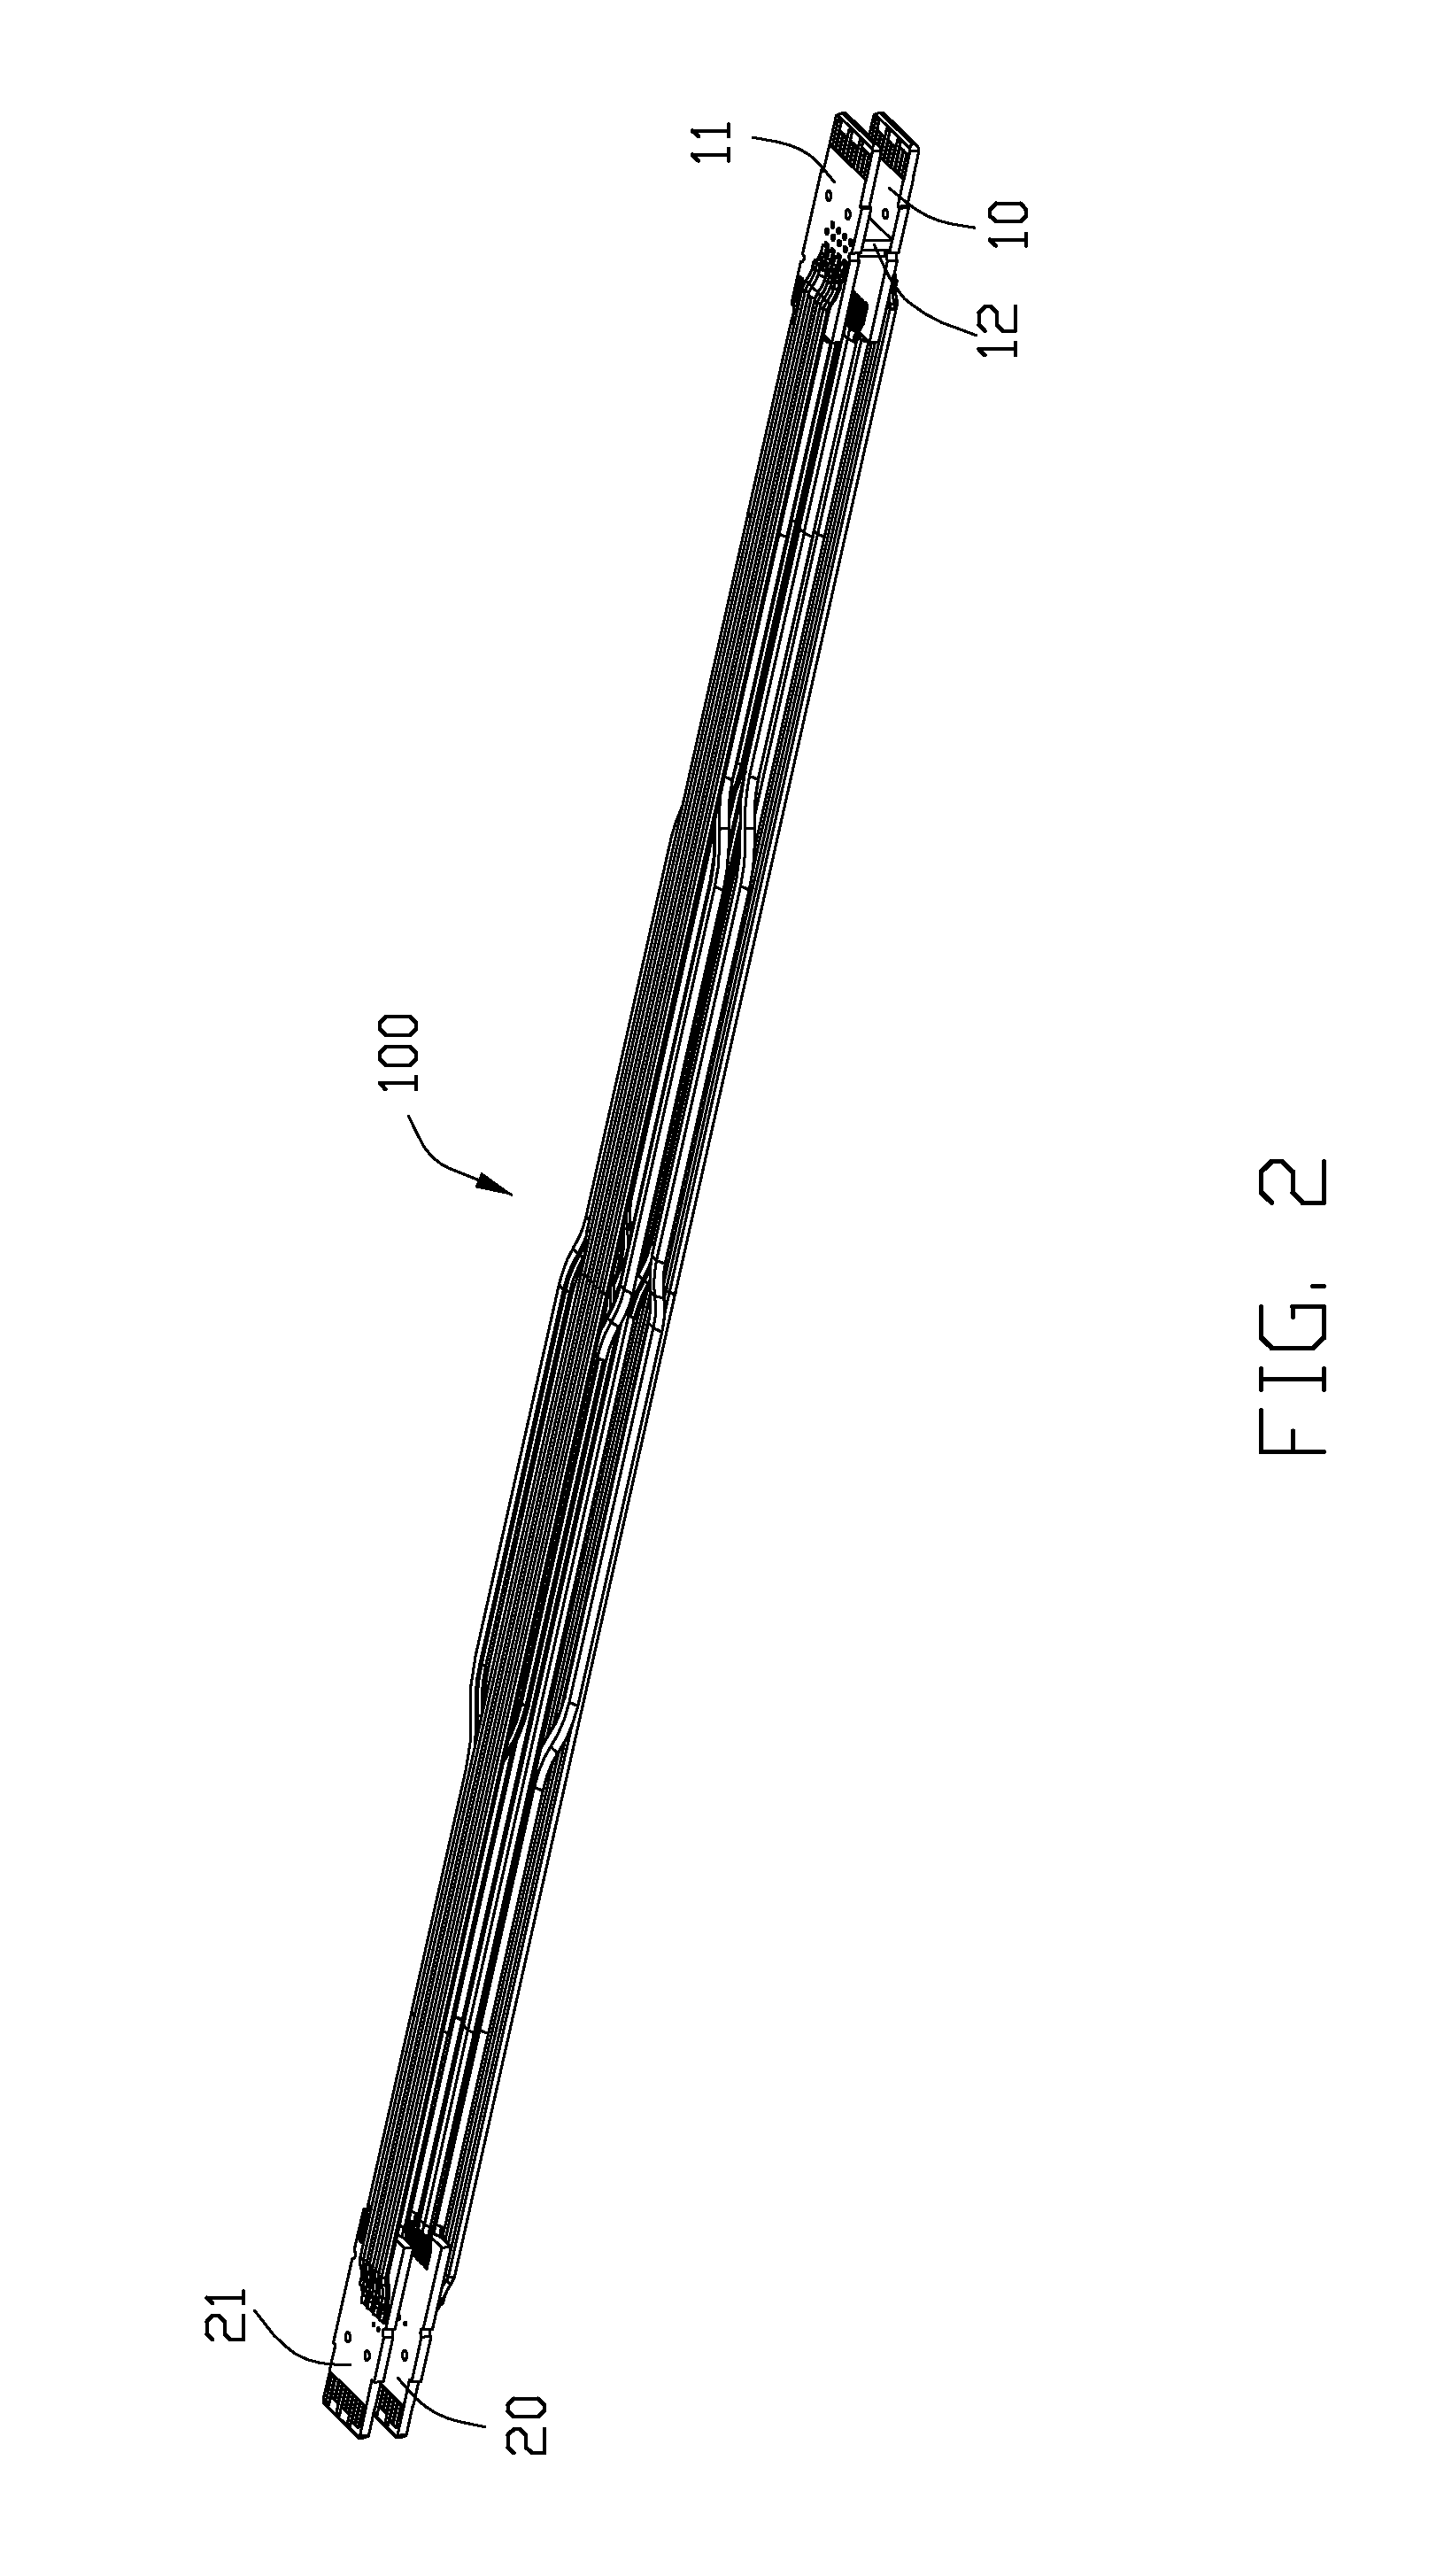 Cable connector assembly having simple wiring arrangement between two end connectors